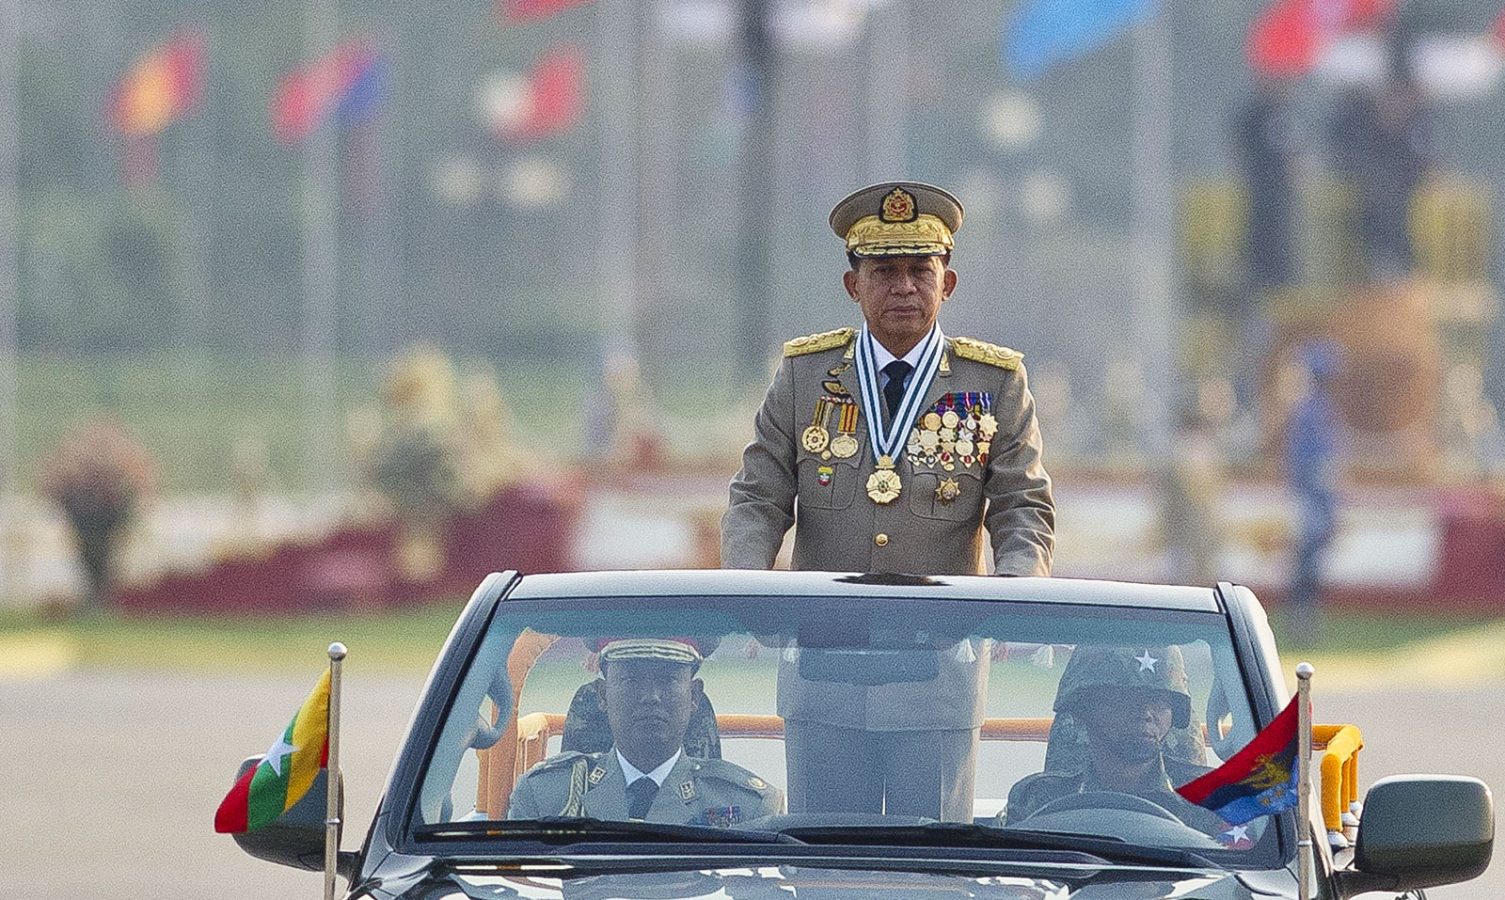 Chief Senior General Min Aung Hlaing, commander in chief of the Myanmar armed forces.